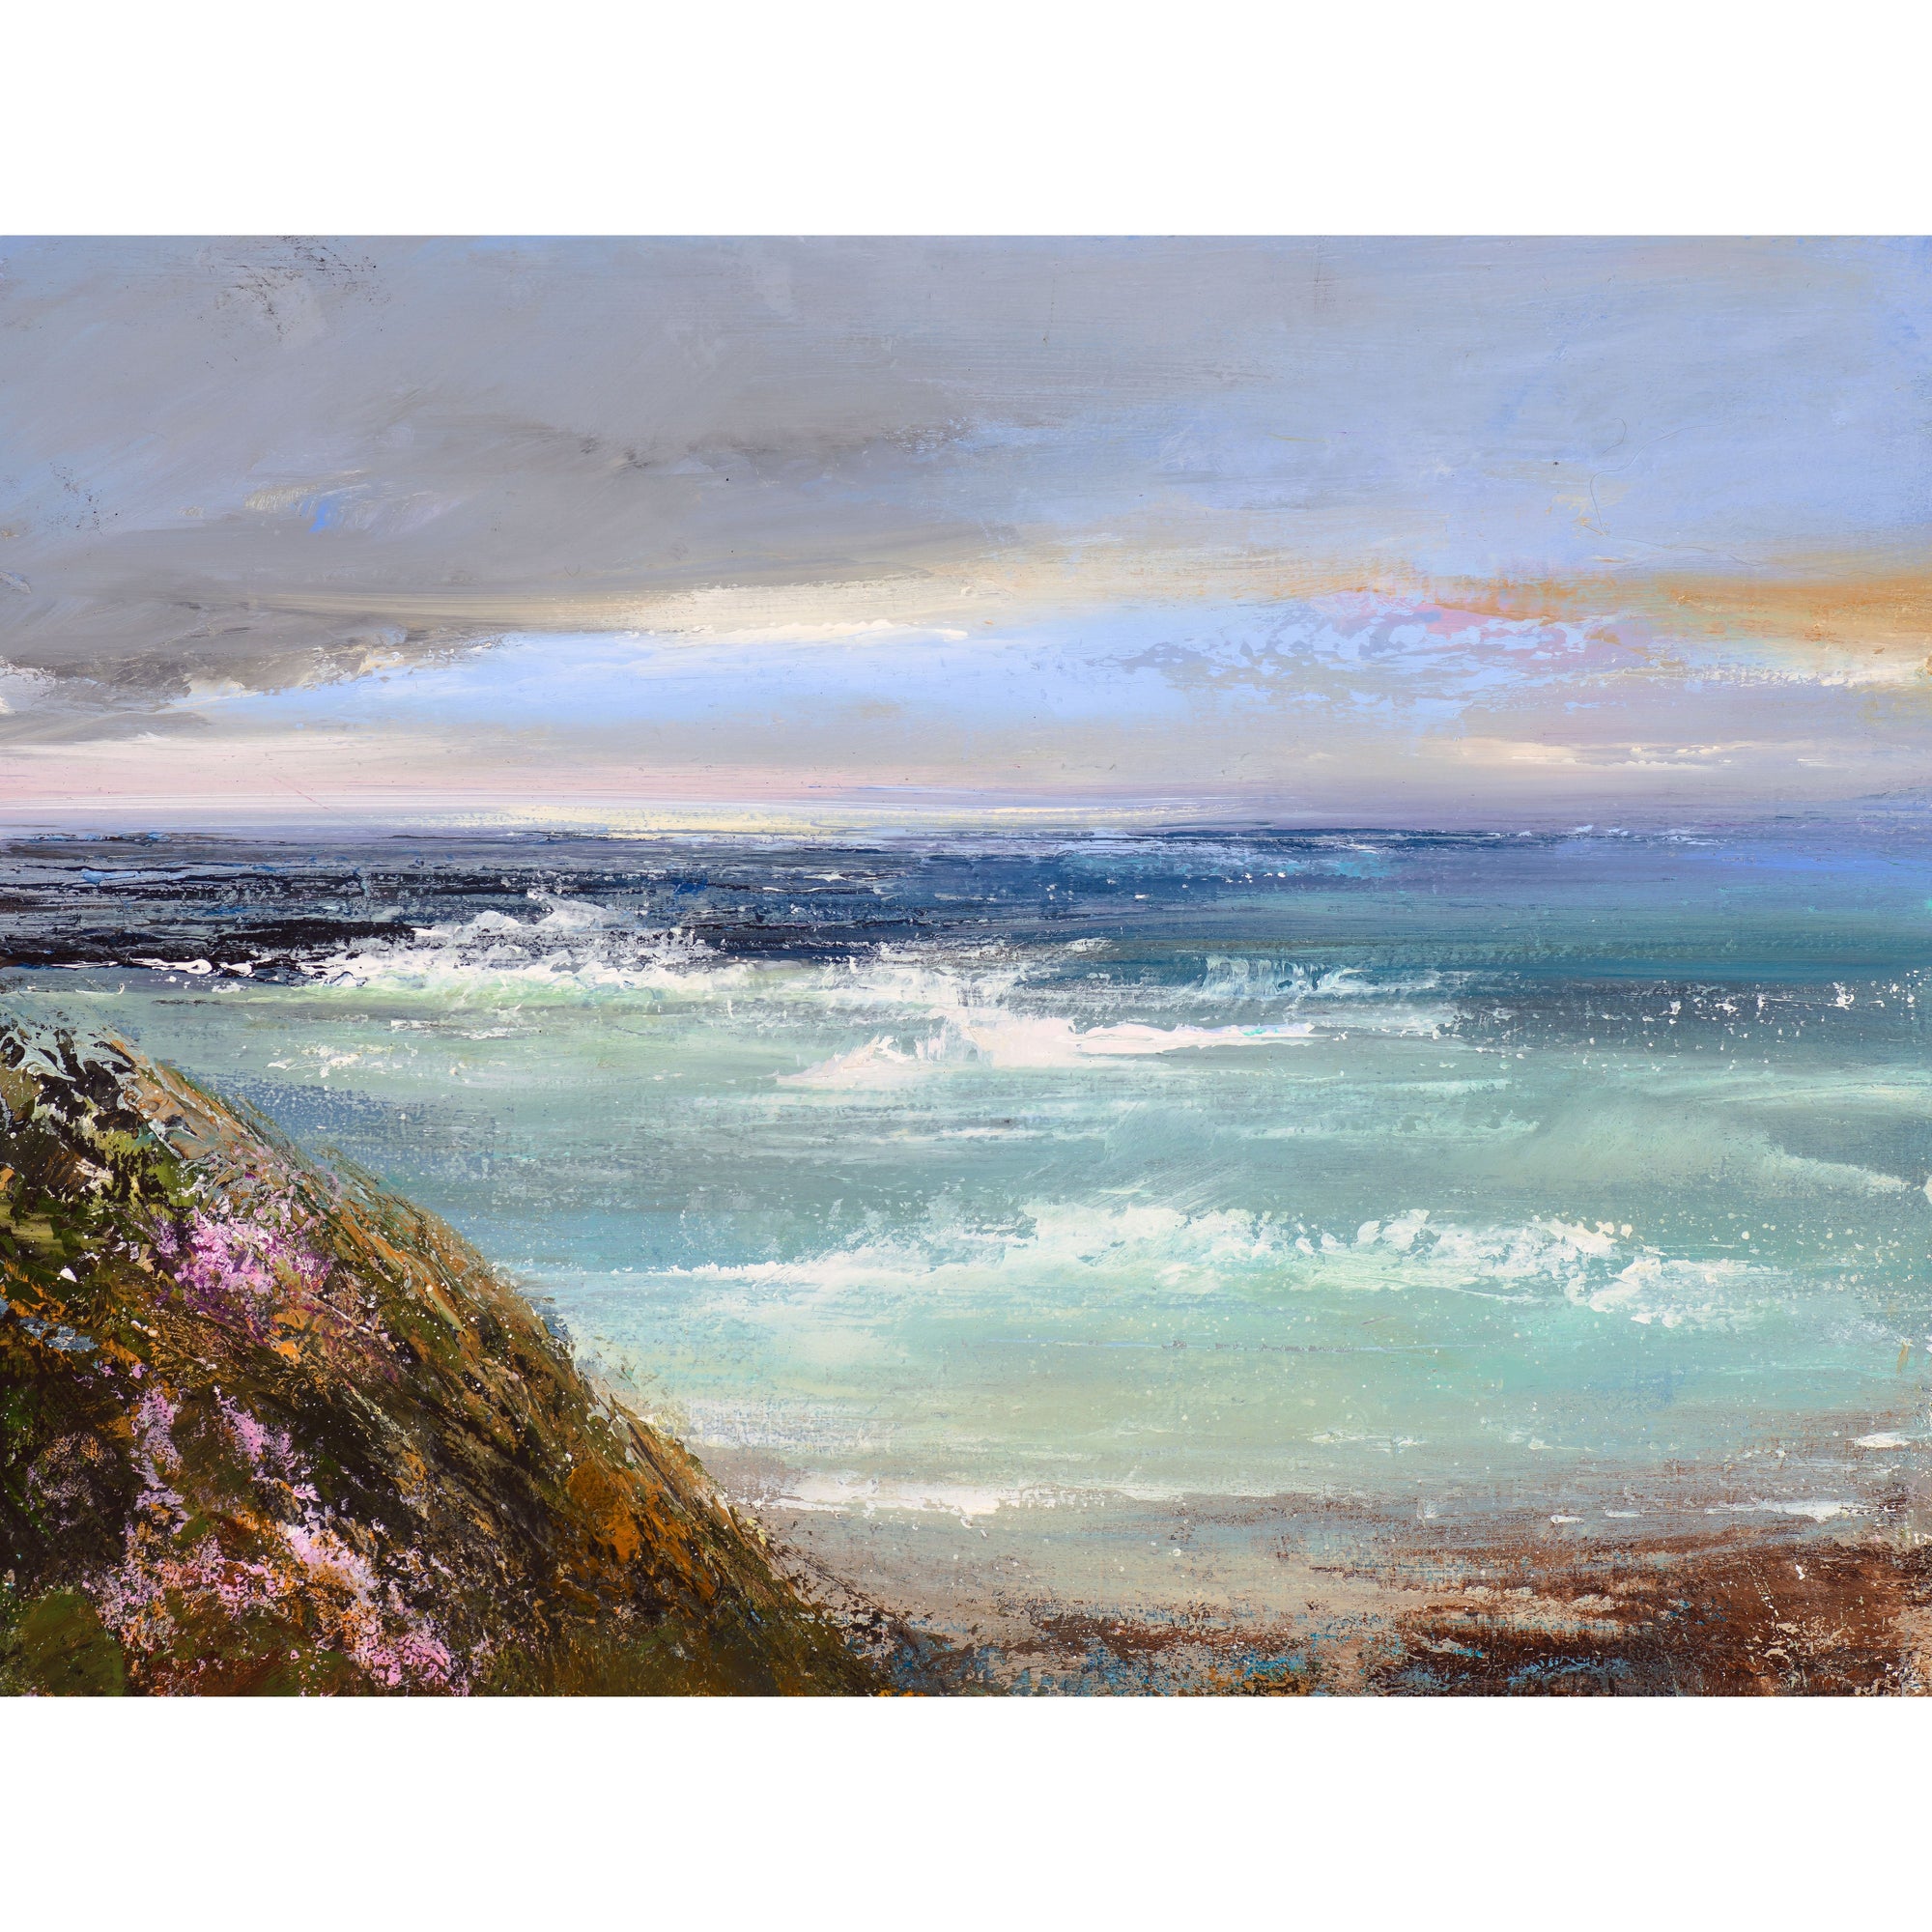 'Watching The Waves Roll In, North Cornwall' oil on canvas original by Amanda Hoskin, available at Padstow Gallery, Cornwall